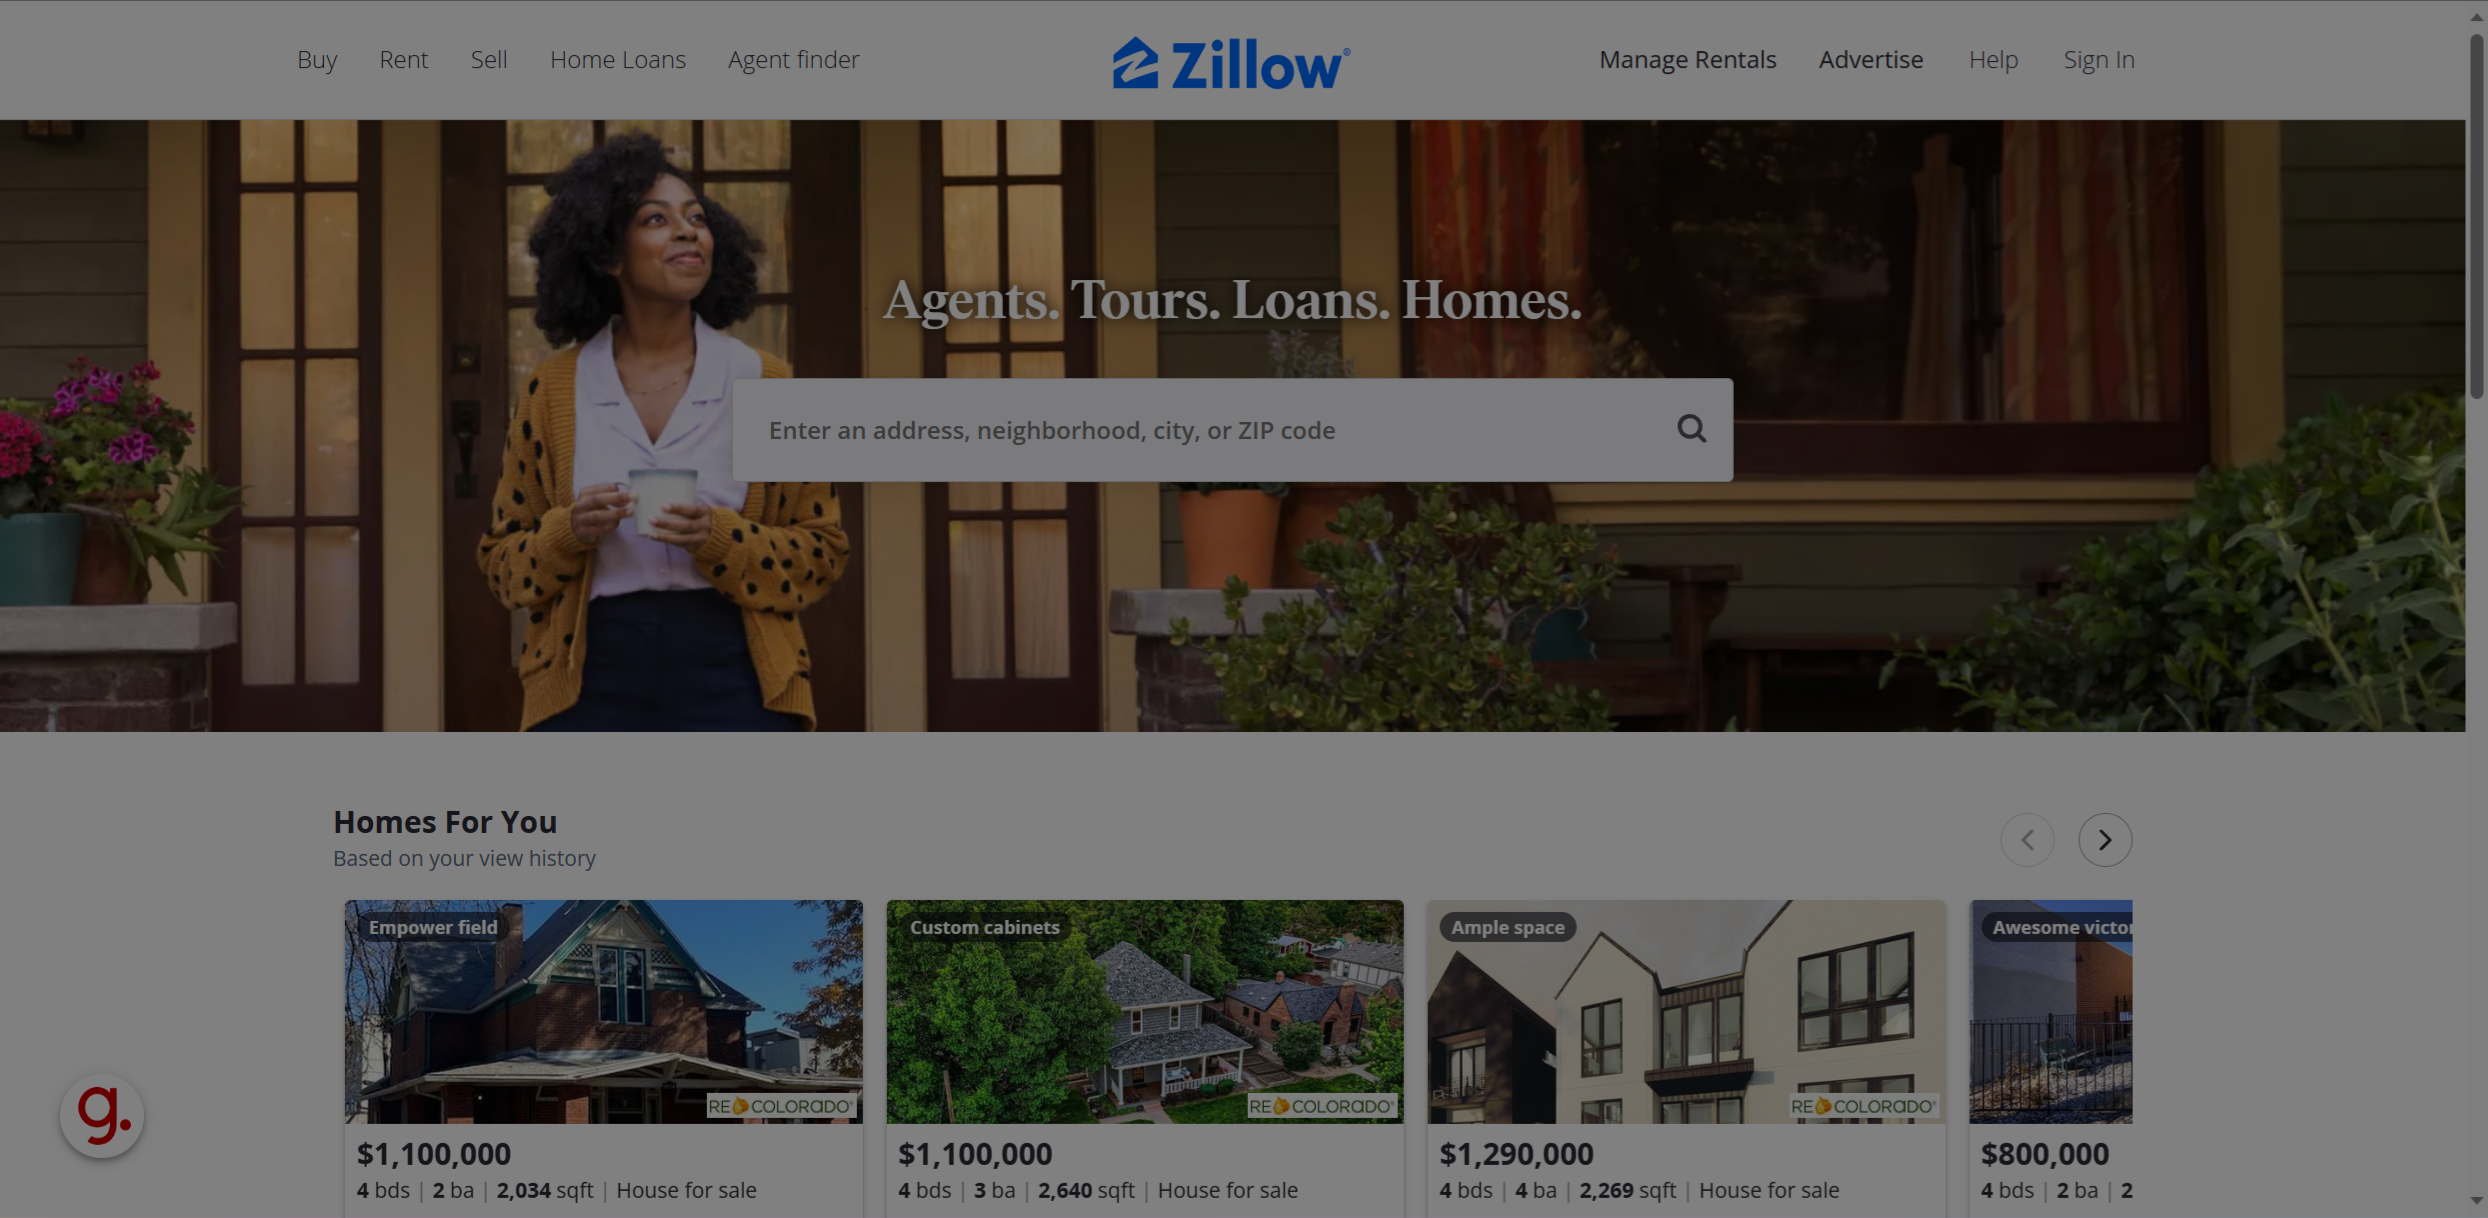 go to www.zillow.com